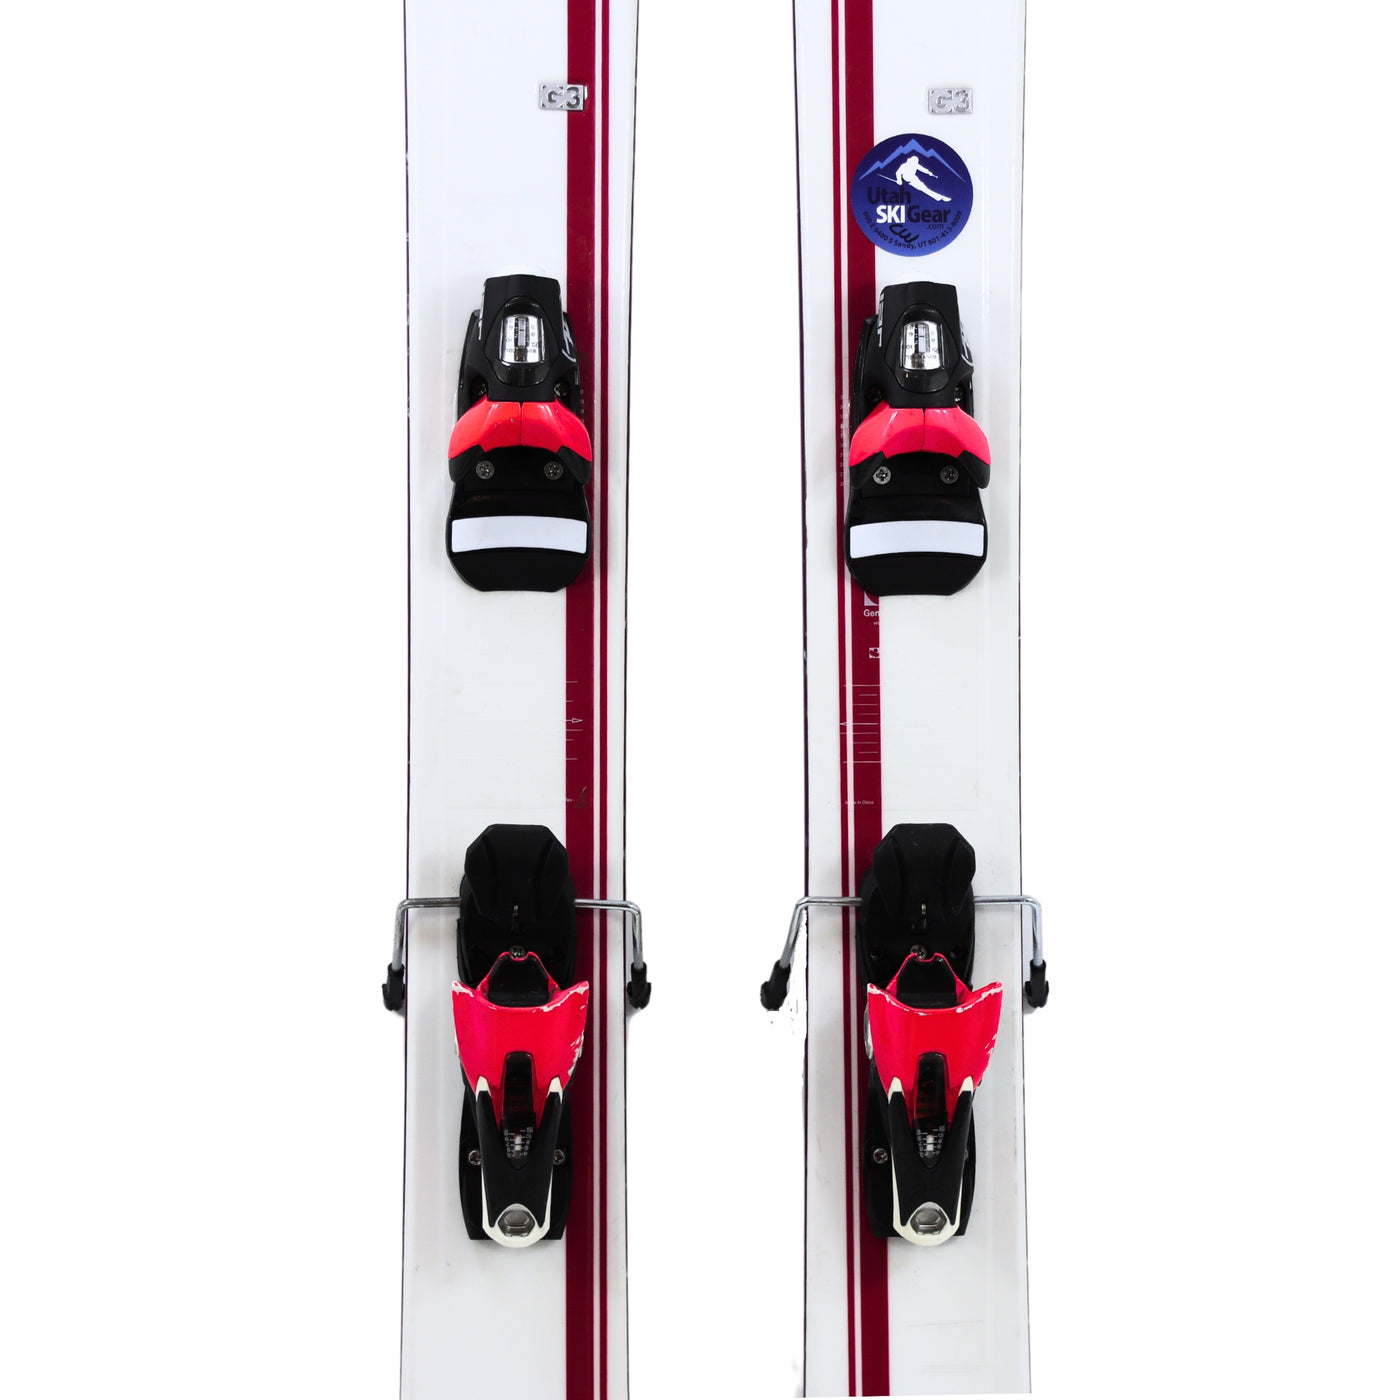 G3 Empress 175 cm + Rossignol Axial 120 2014 - USED SKIS G3   